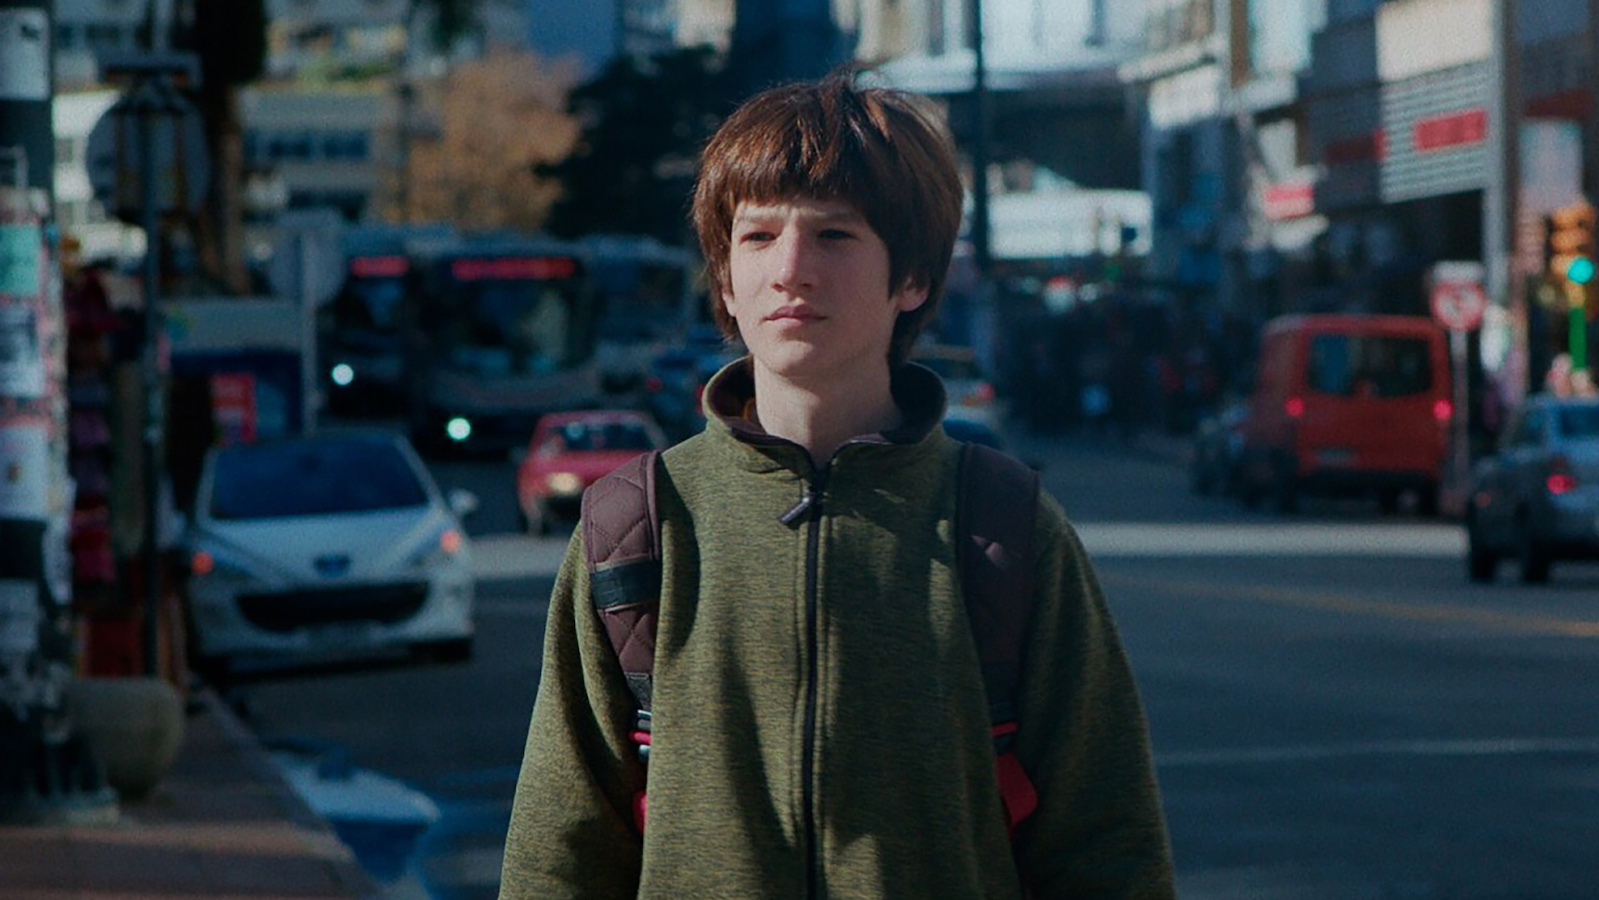 A boy wearing a sweatshirt and backpack stands in a city street and stares off